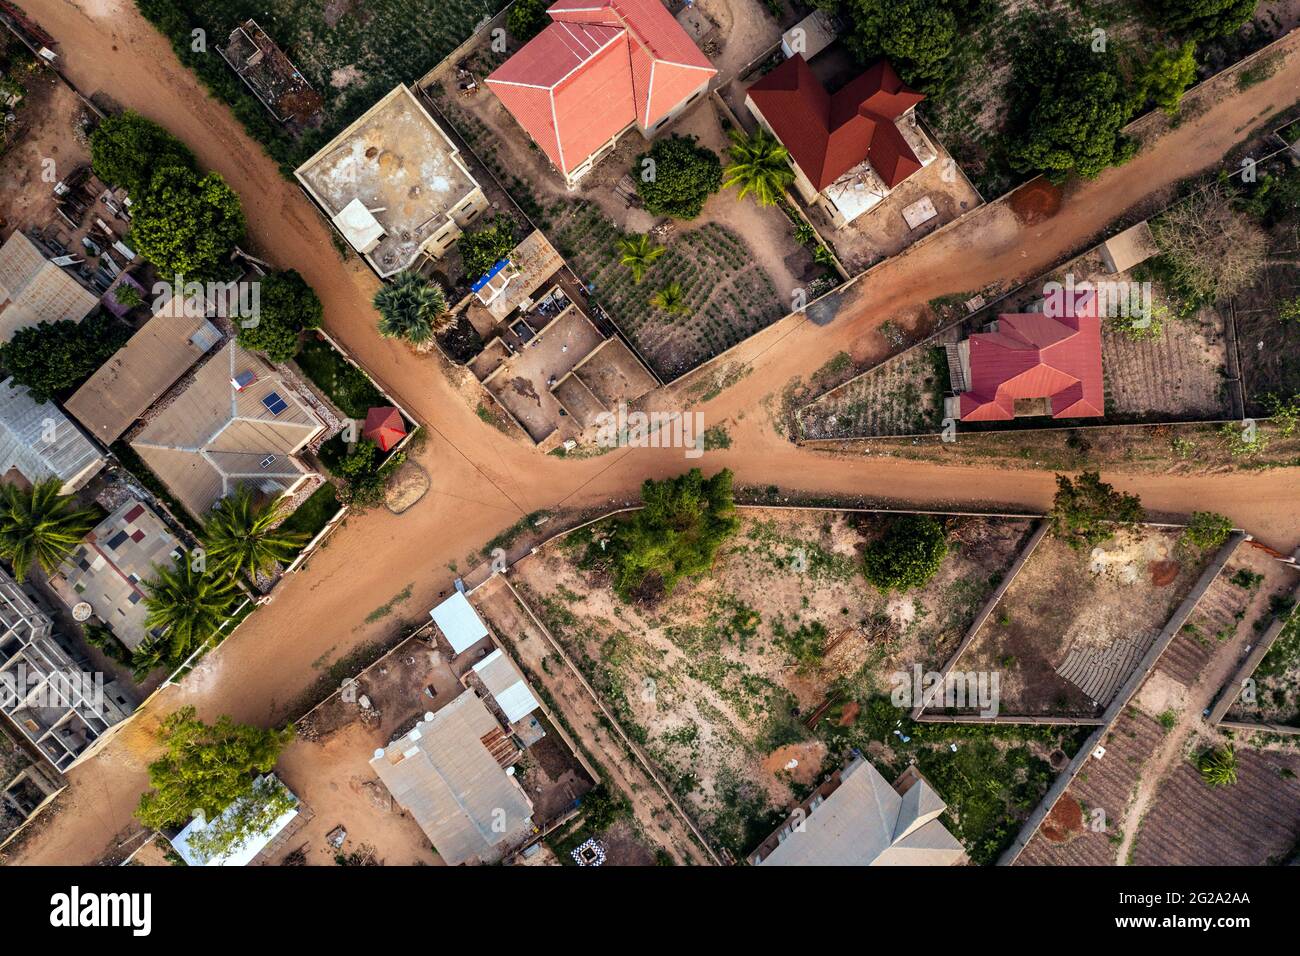 Drone view of shabby houses with greenery and dusty roads on summer day in Gambia, Africa Stock Photo